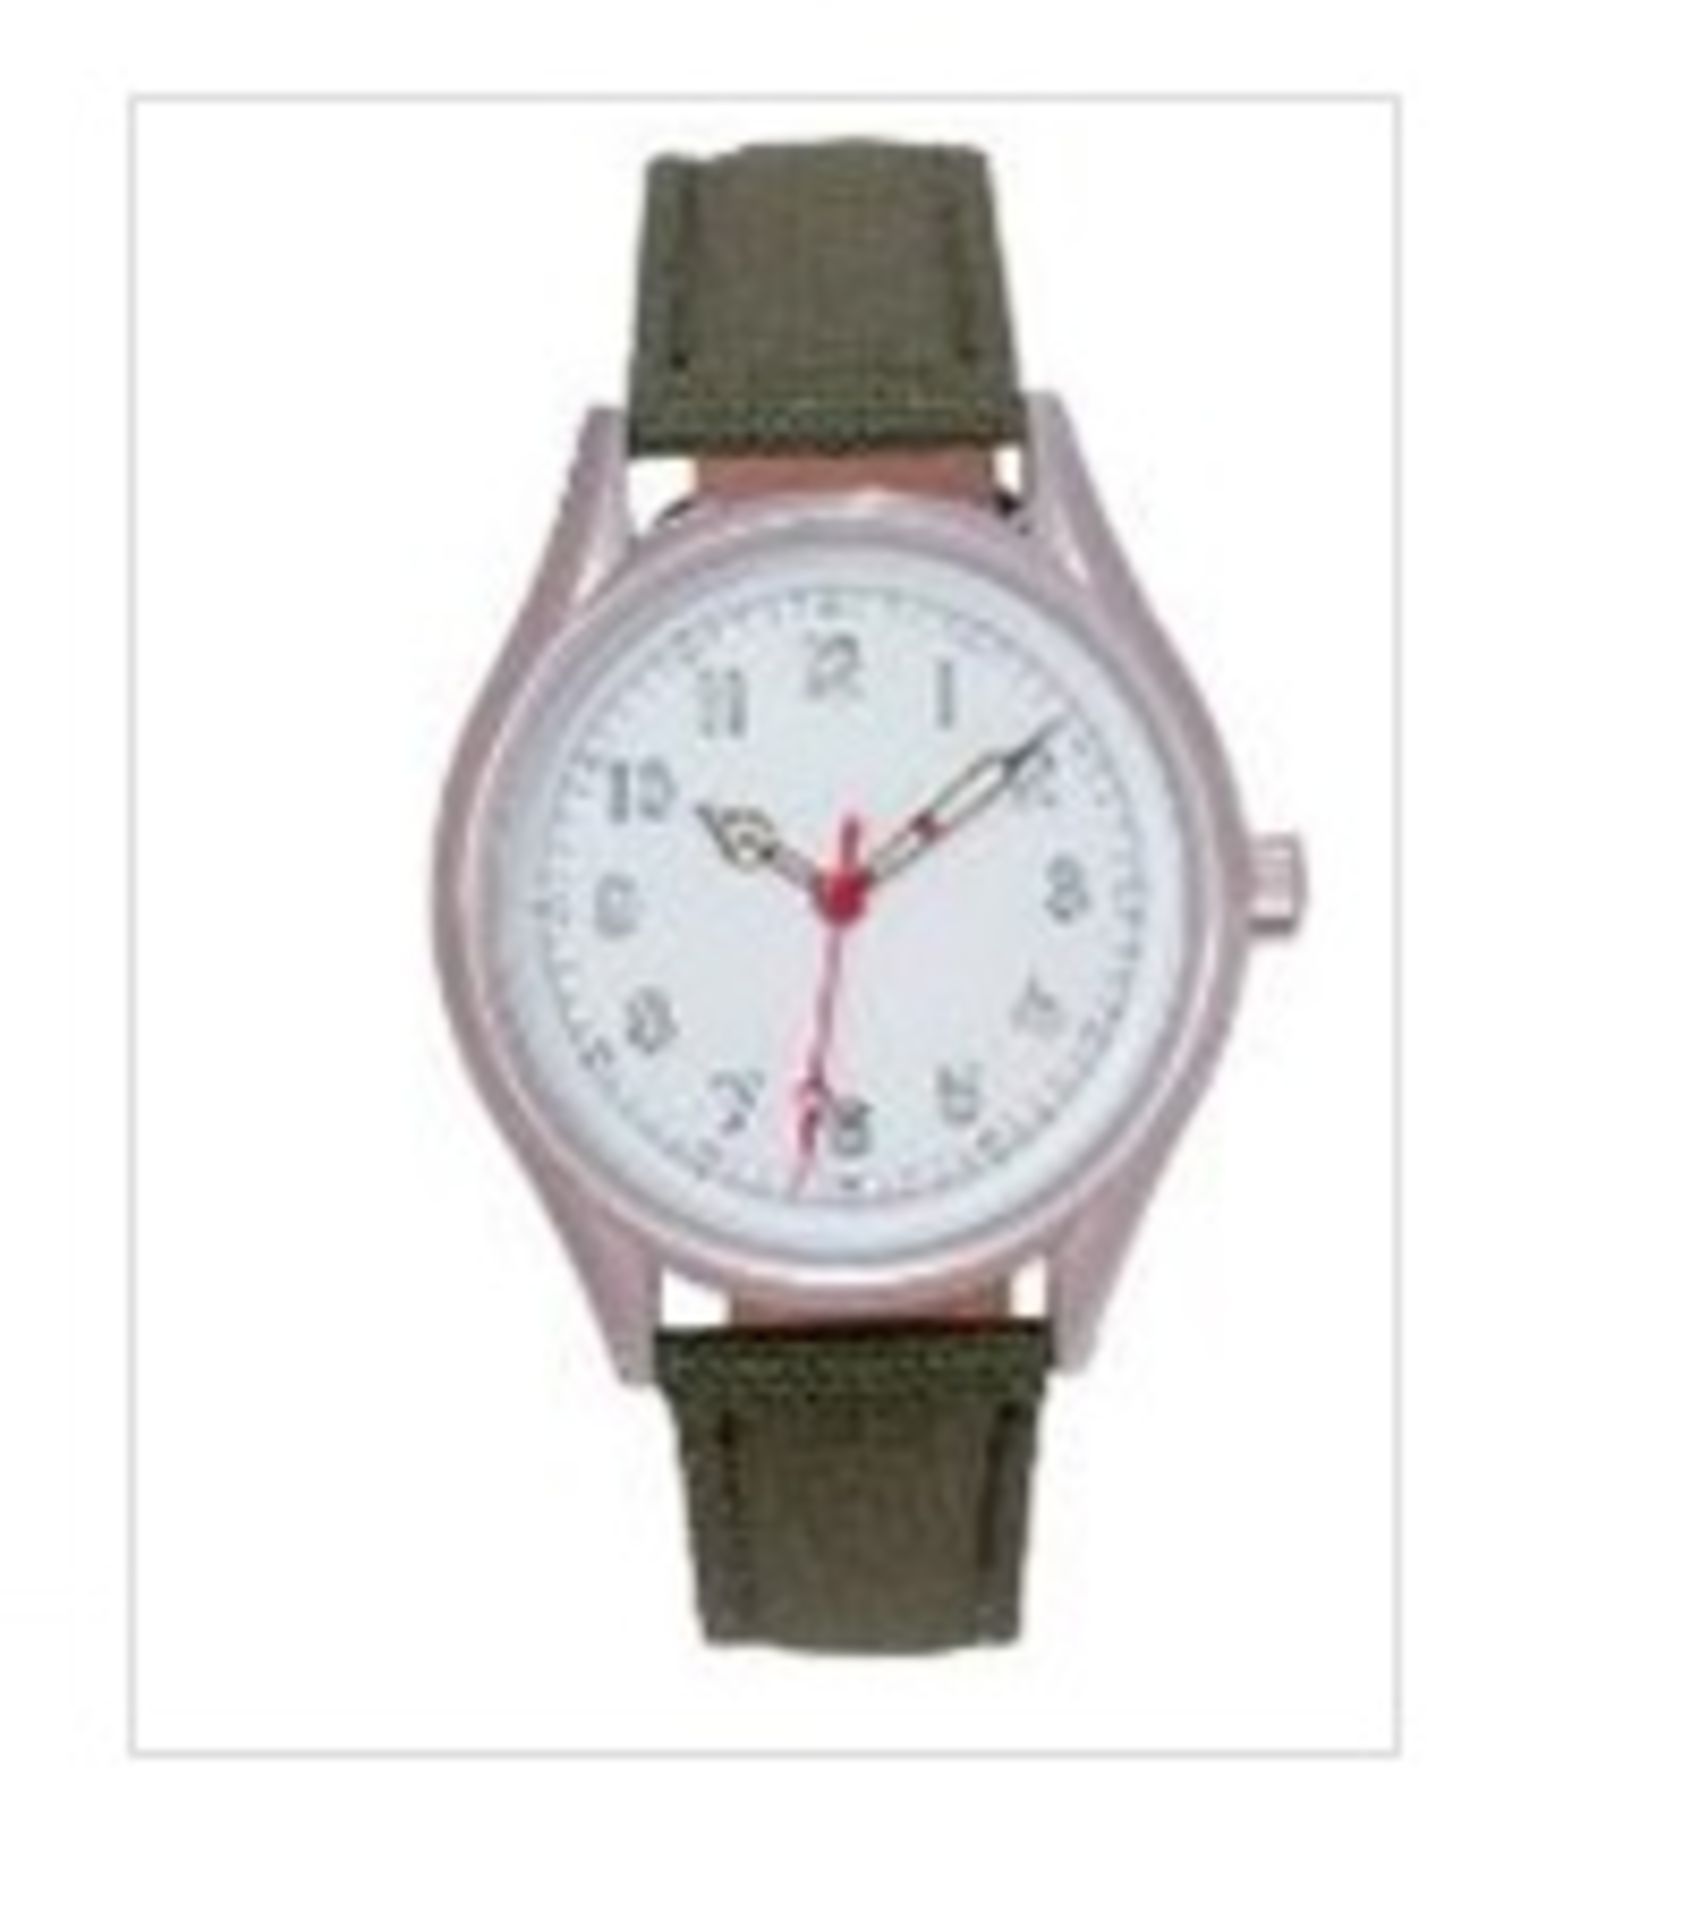 + VAT Brand New Gents 1970s Indian Solider Watch With Engraved Back In Presentation Box - Image 2 of 2